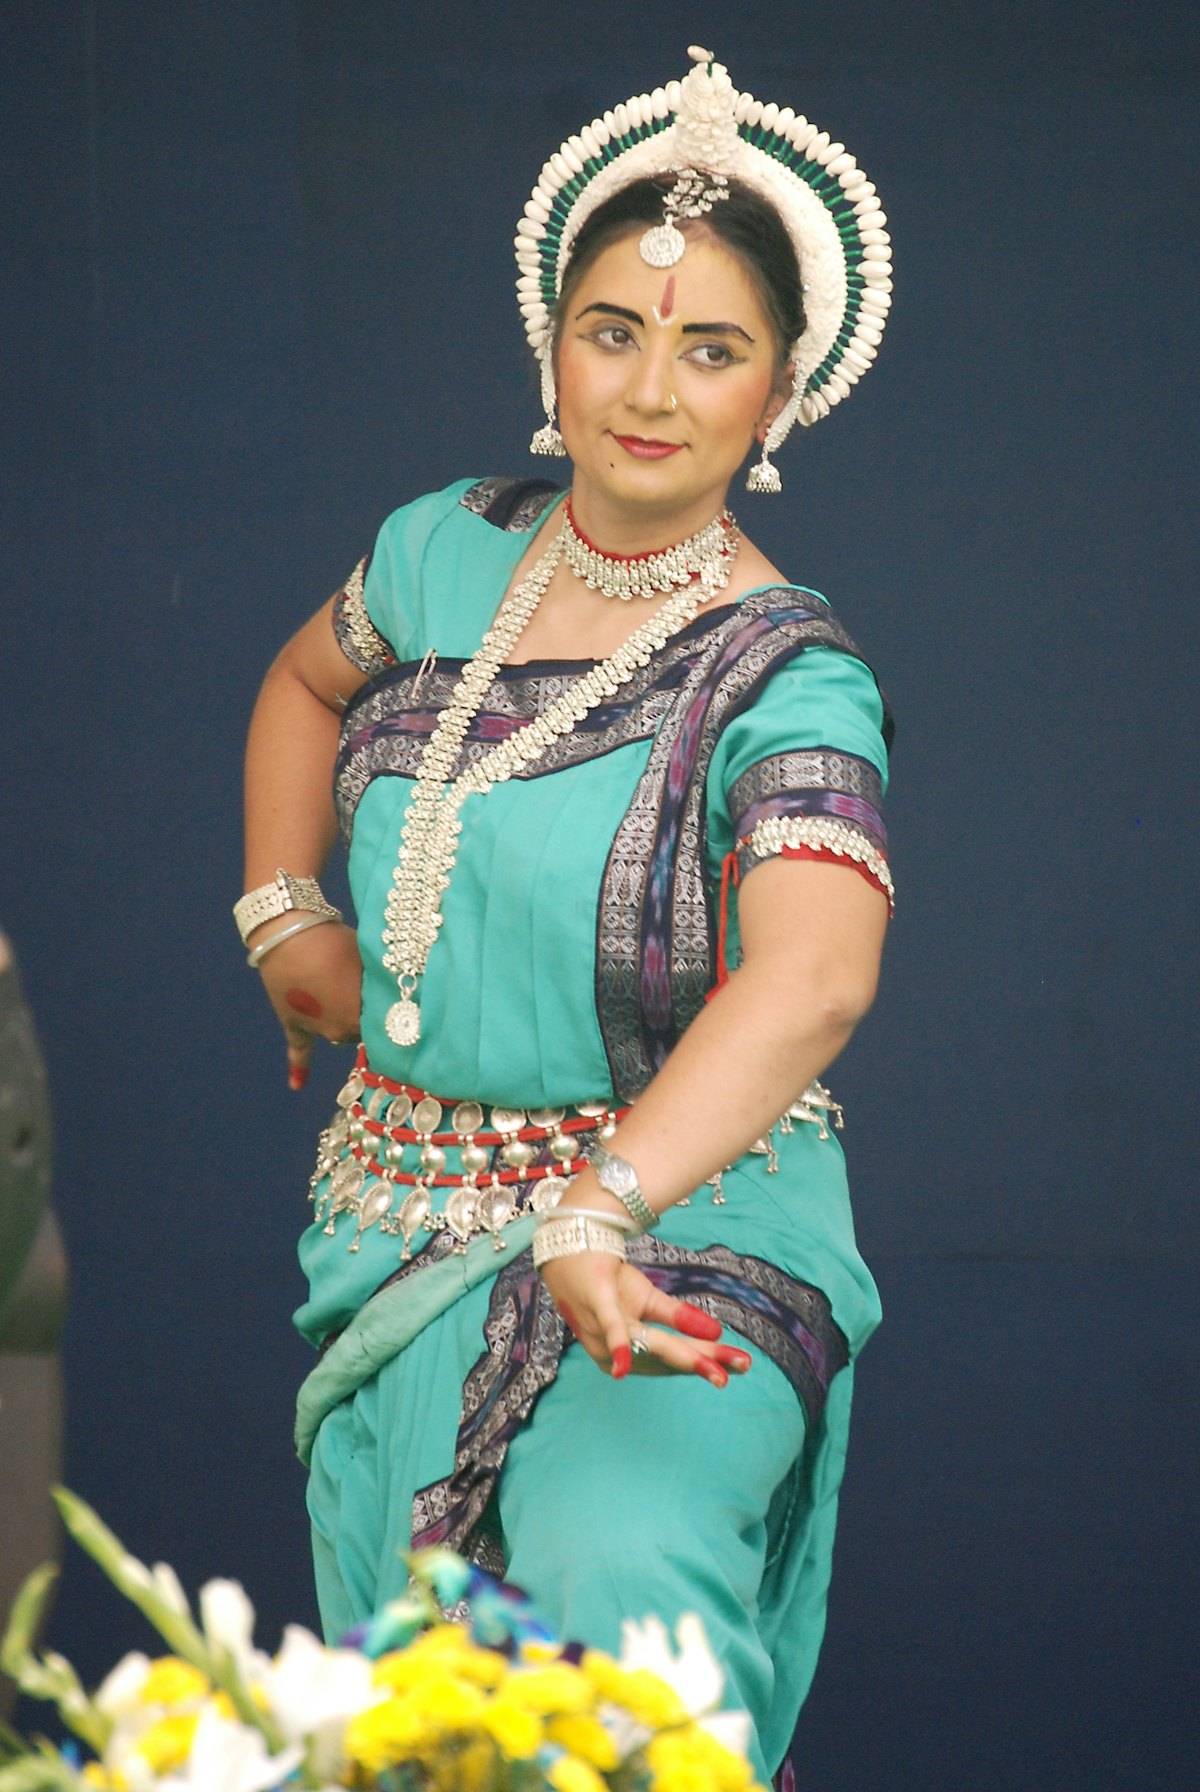 A traditional dancer from Odisha state, located on the east coast of India, performs at the 25th anniversary celebrations for the Baha'i House of Worship, New Delhi, 11-12 November, 2011.